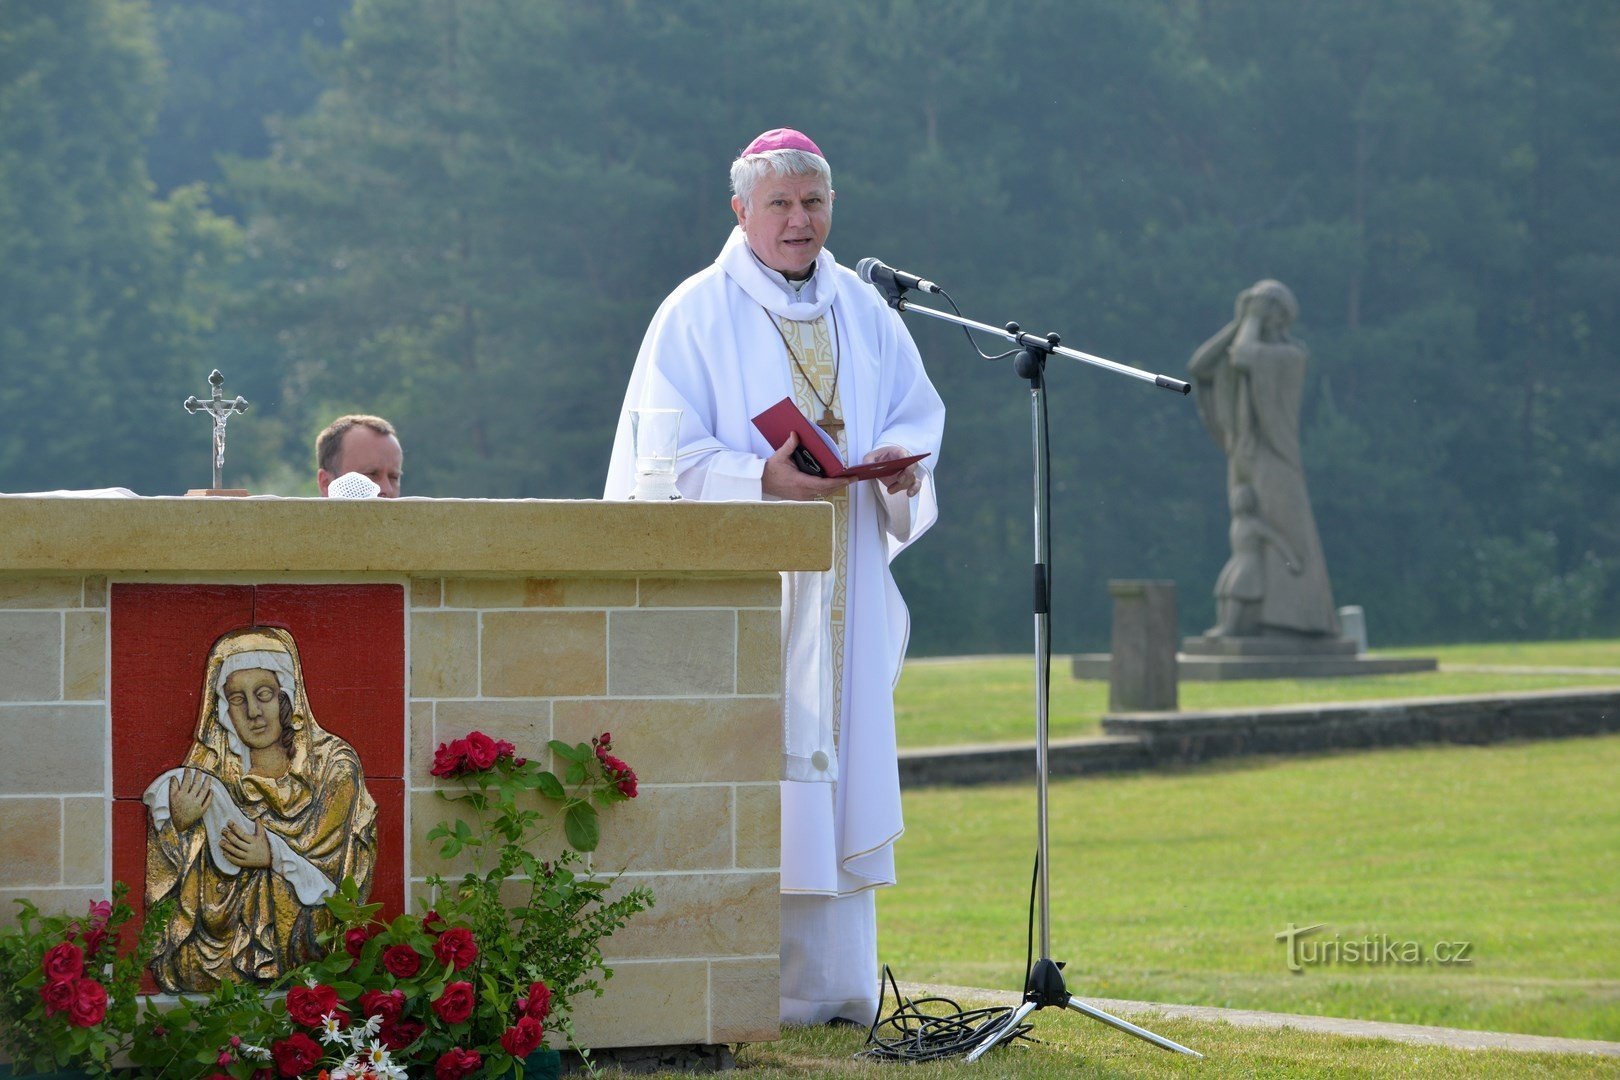 Commemoration of the 74th anniversary of the extermination of the village of Lidice